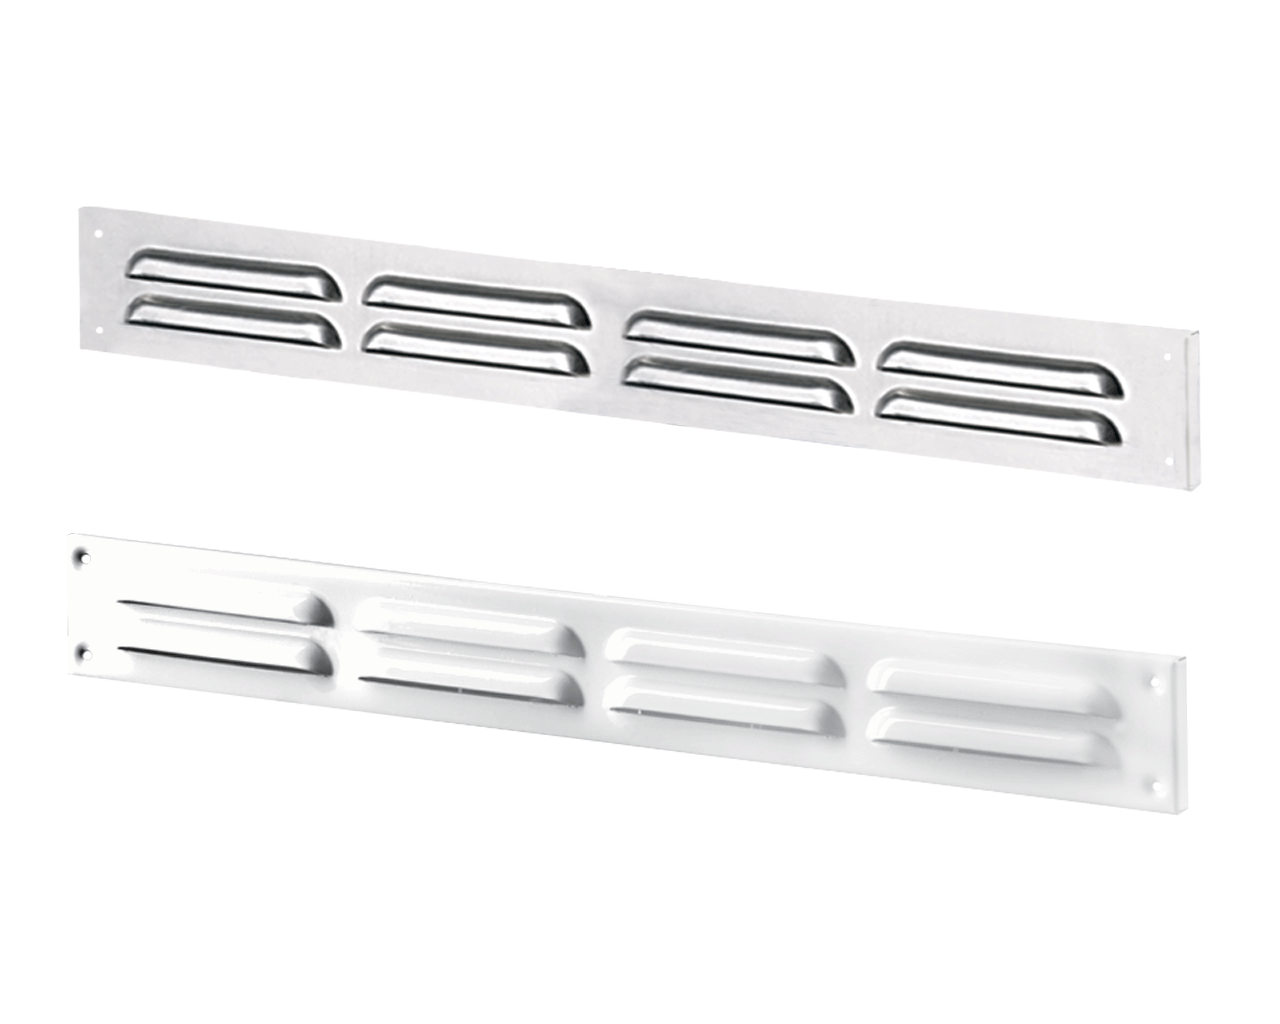 Supply and exhaust metal slot edge-raised grilles MVMPO series